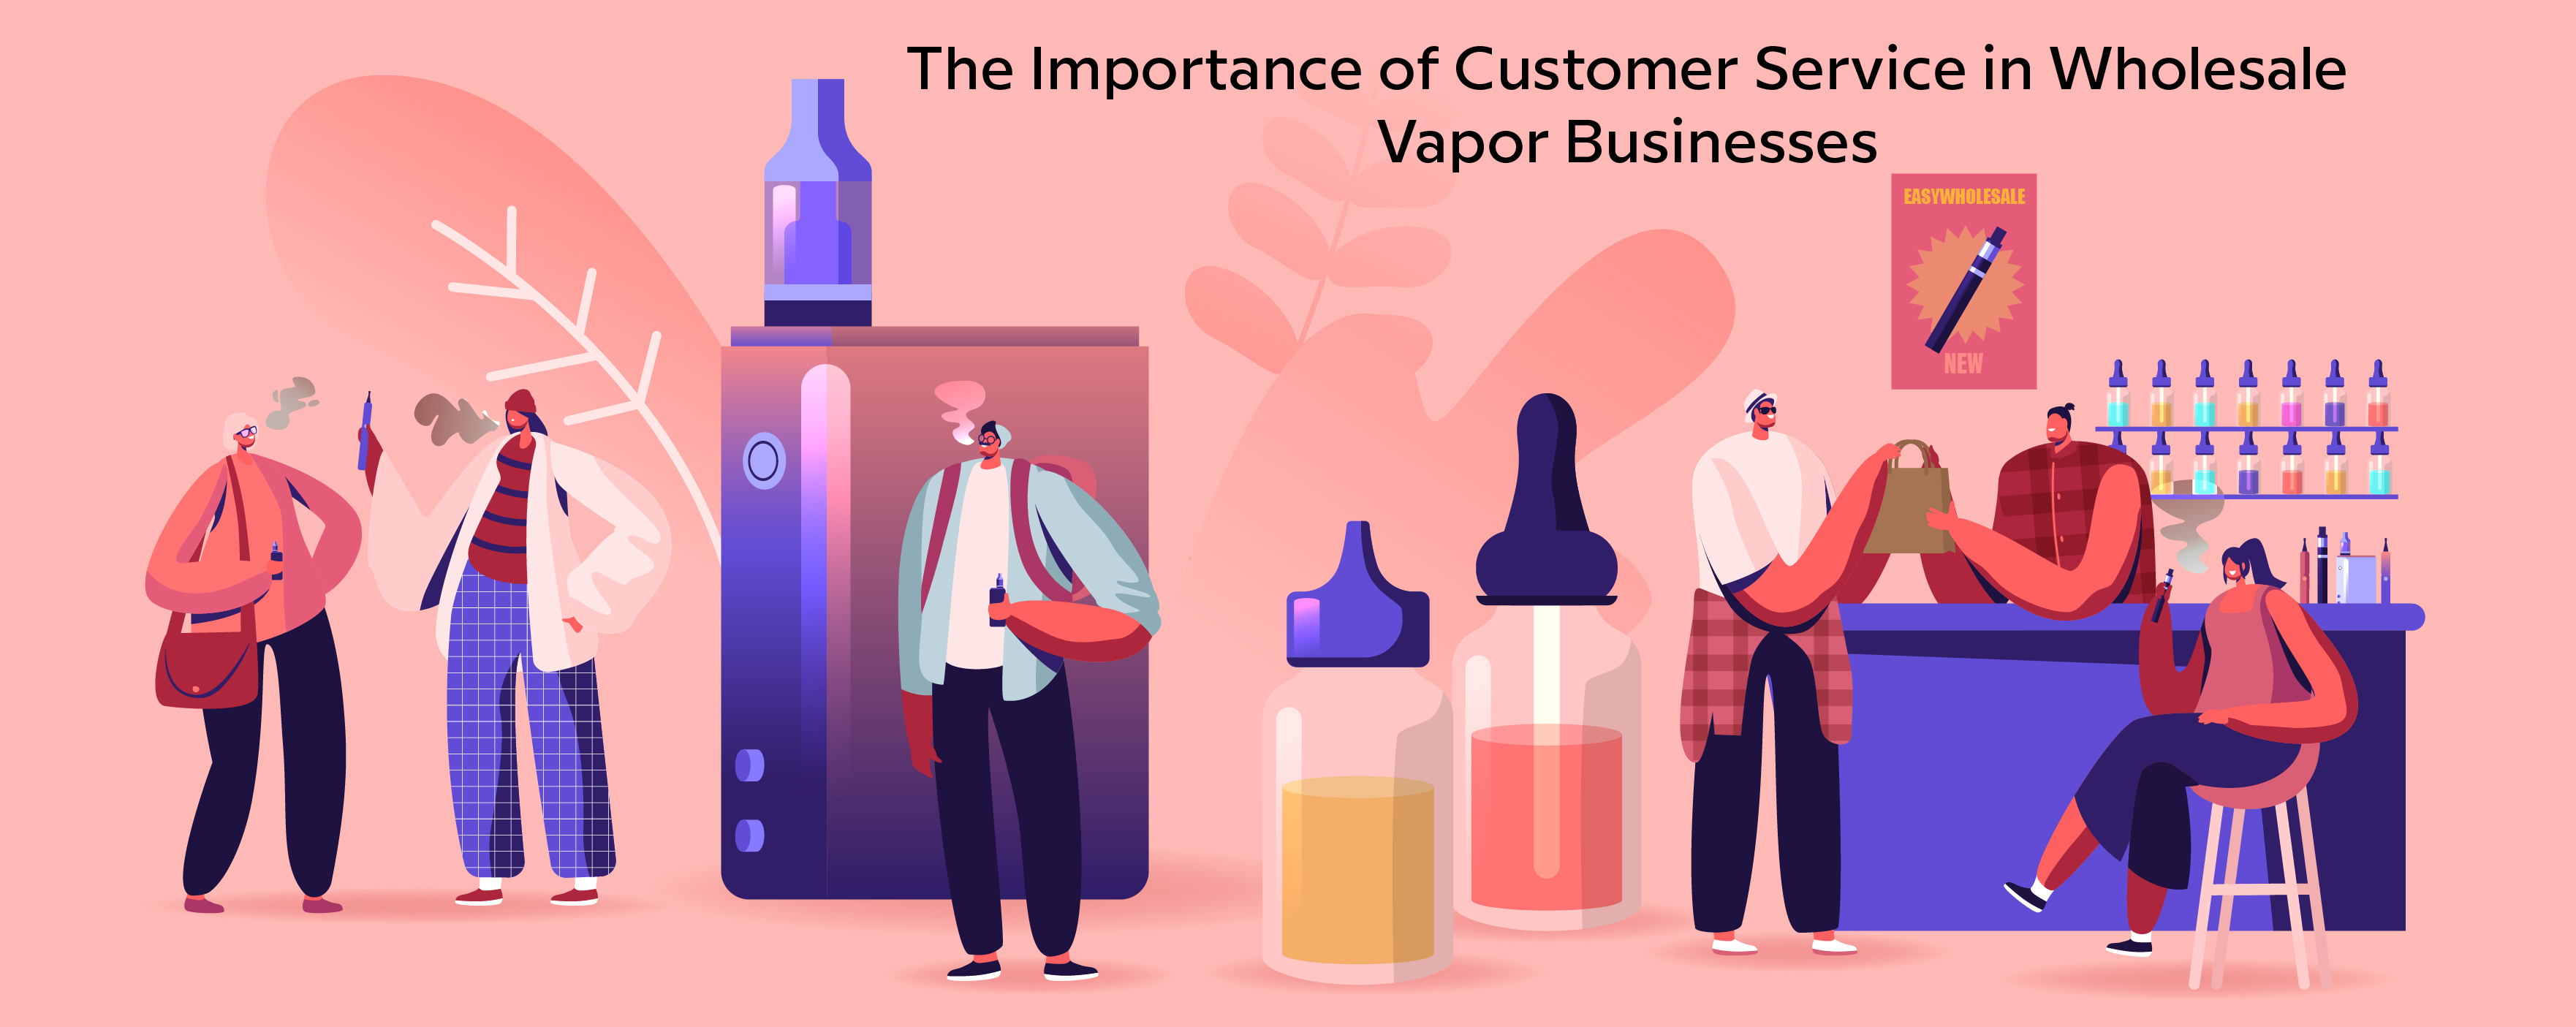 The Importance of Customer Service in Wholesale Vapor Businesses